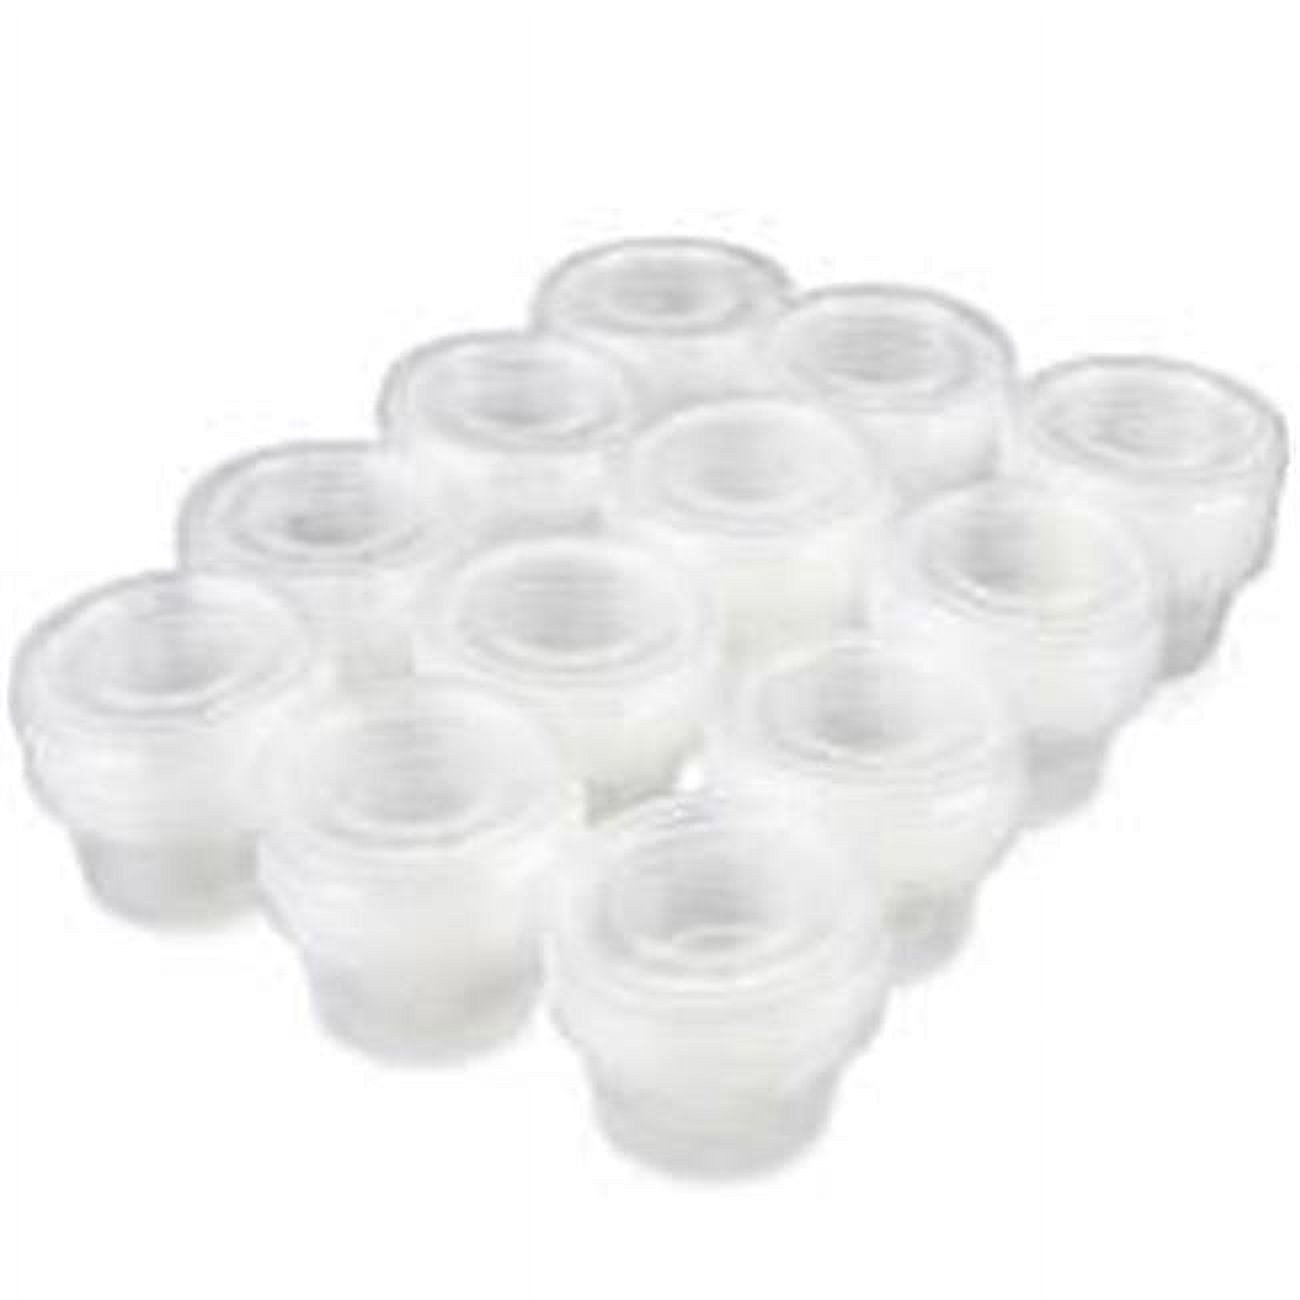 Picture of Brybelly KDCT-001 2 oz Condiment Dishes - Pack of 100